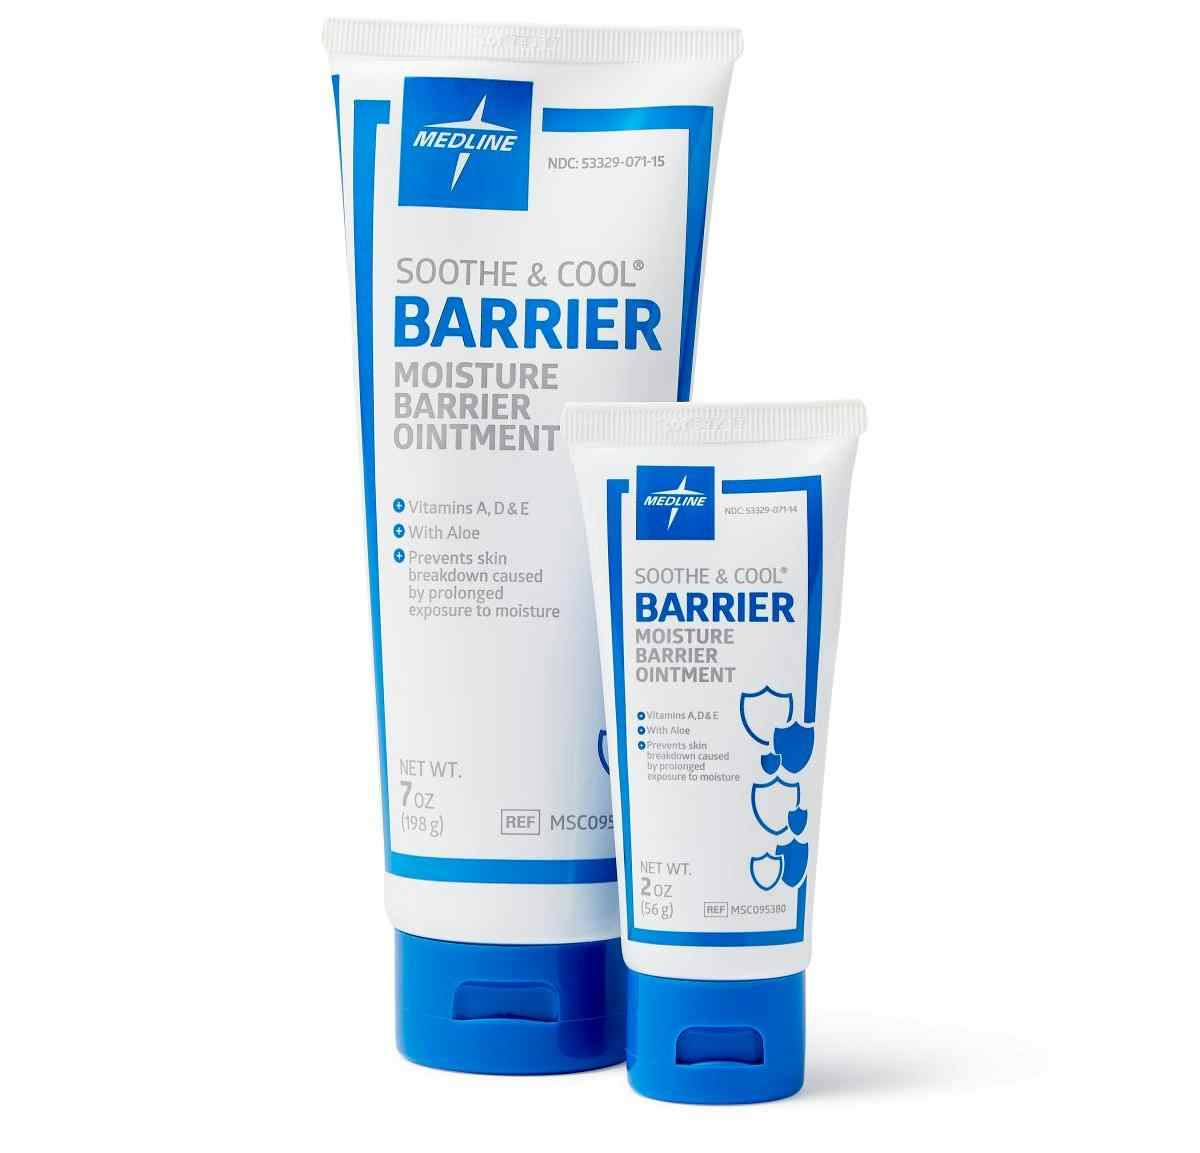 Soothe & Cool Barrier Ointment